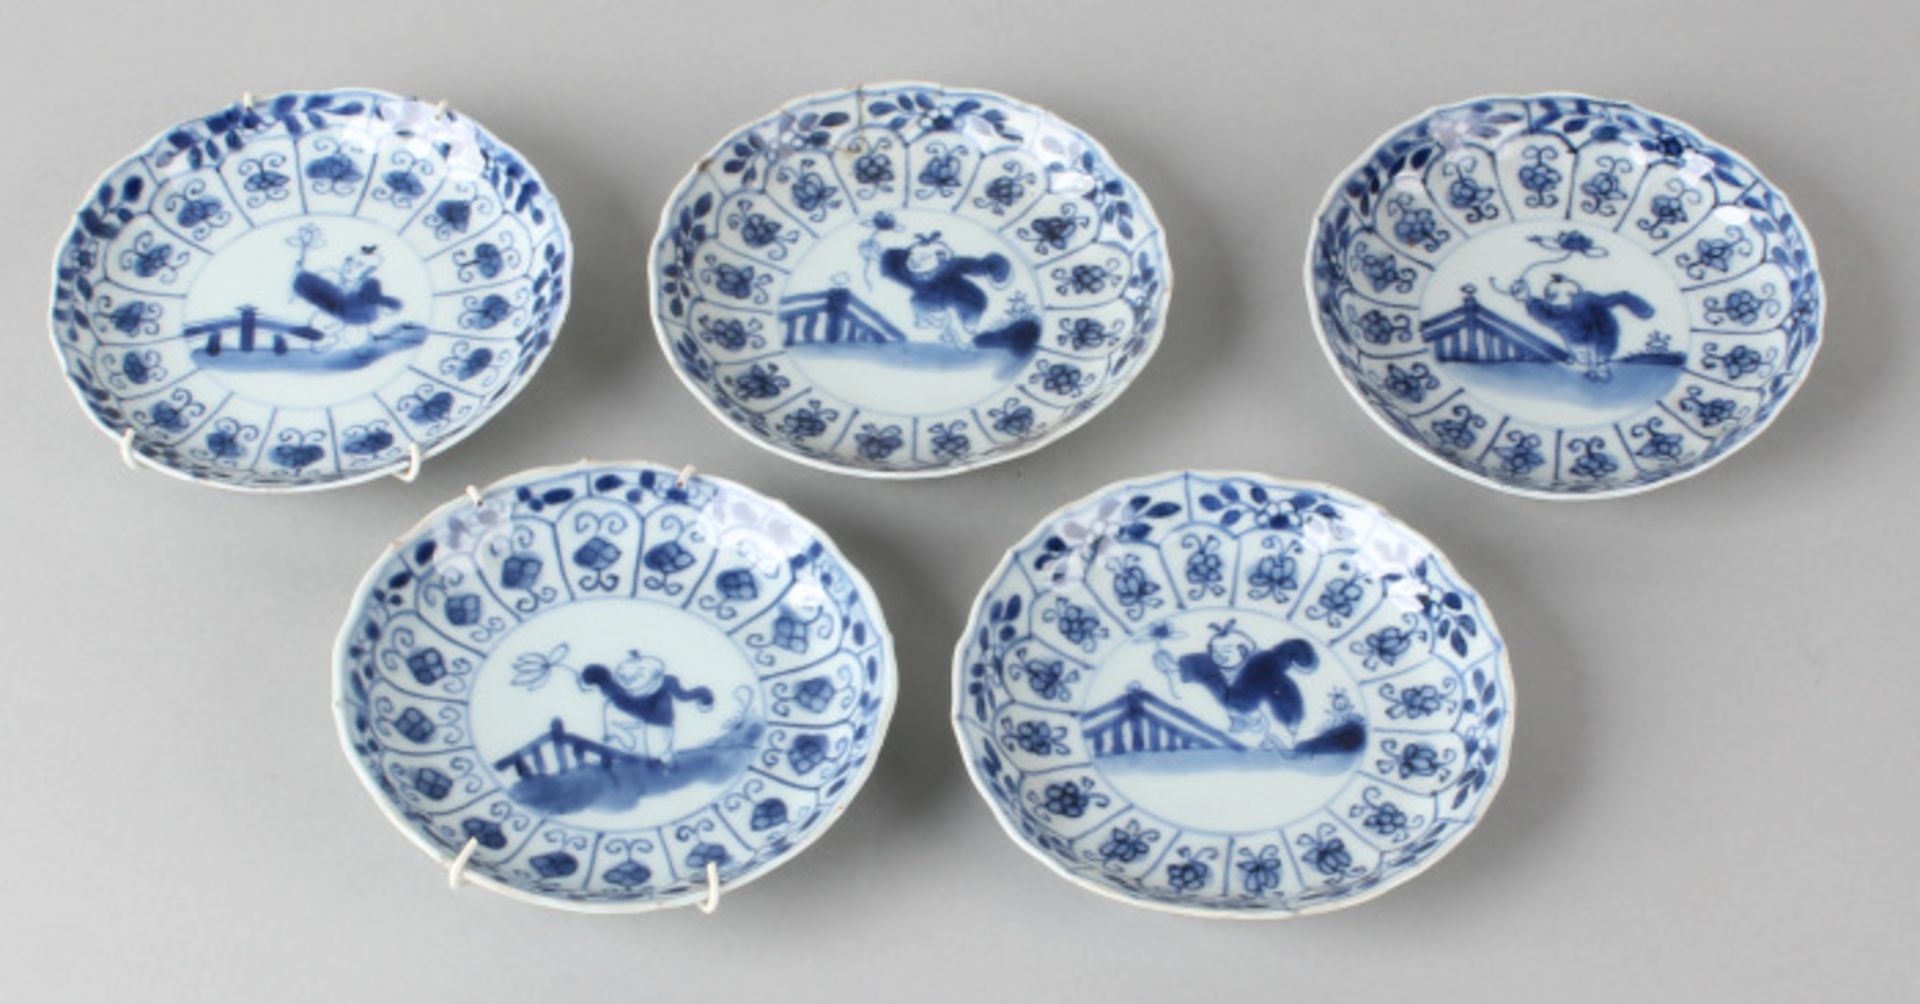 Five 18th century Chinese porcelain dishes with playing children, scalloped edging, four good, one